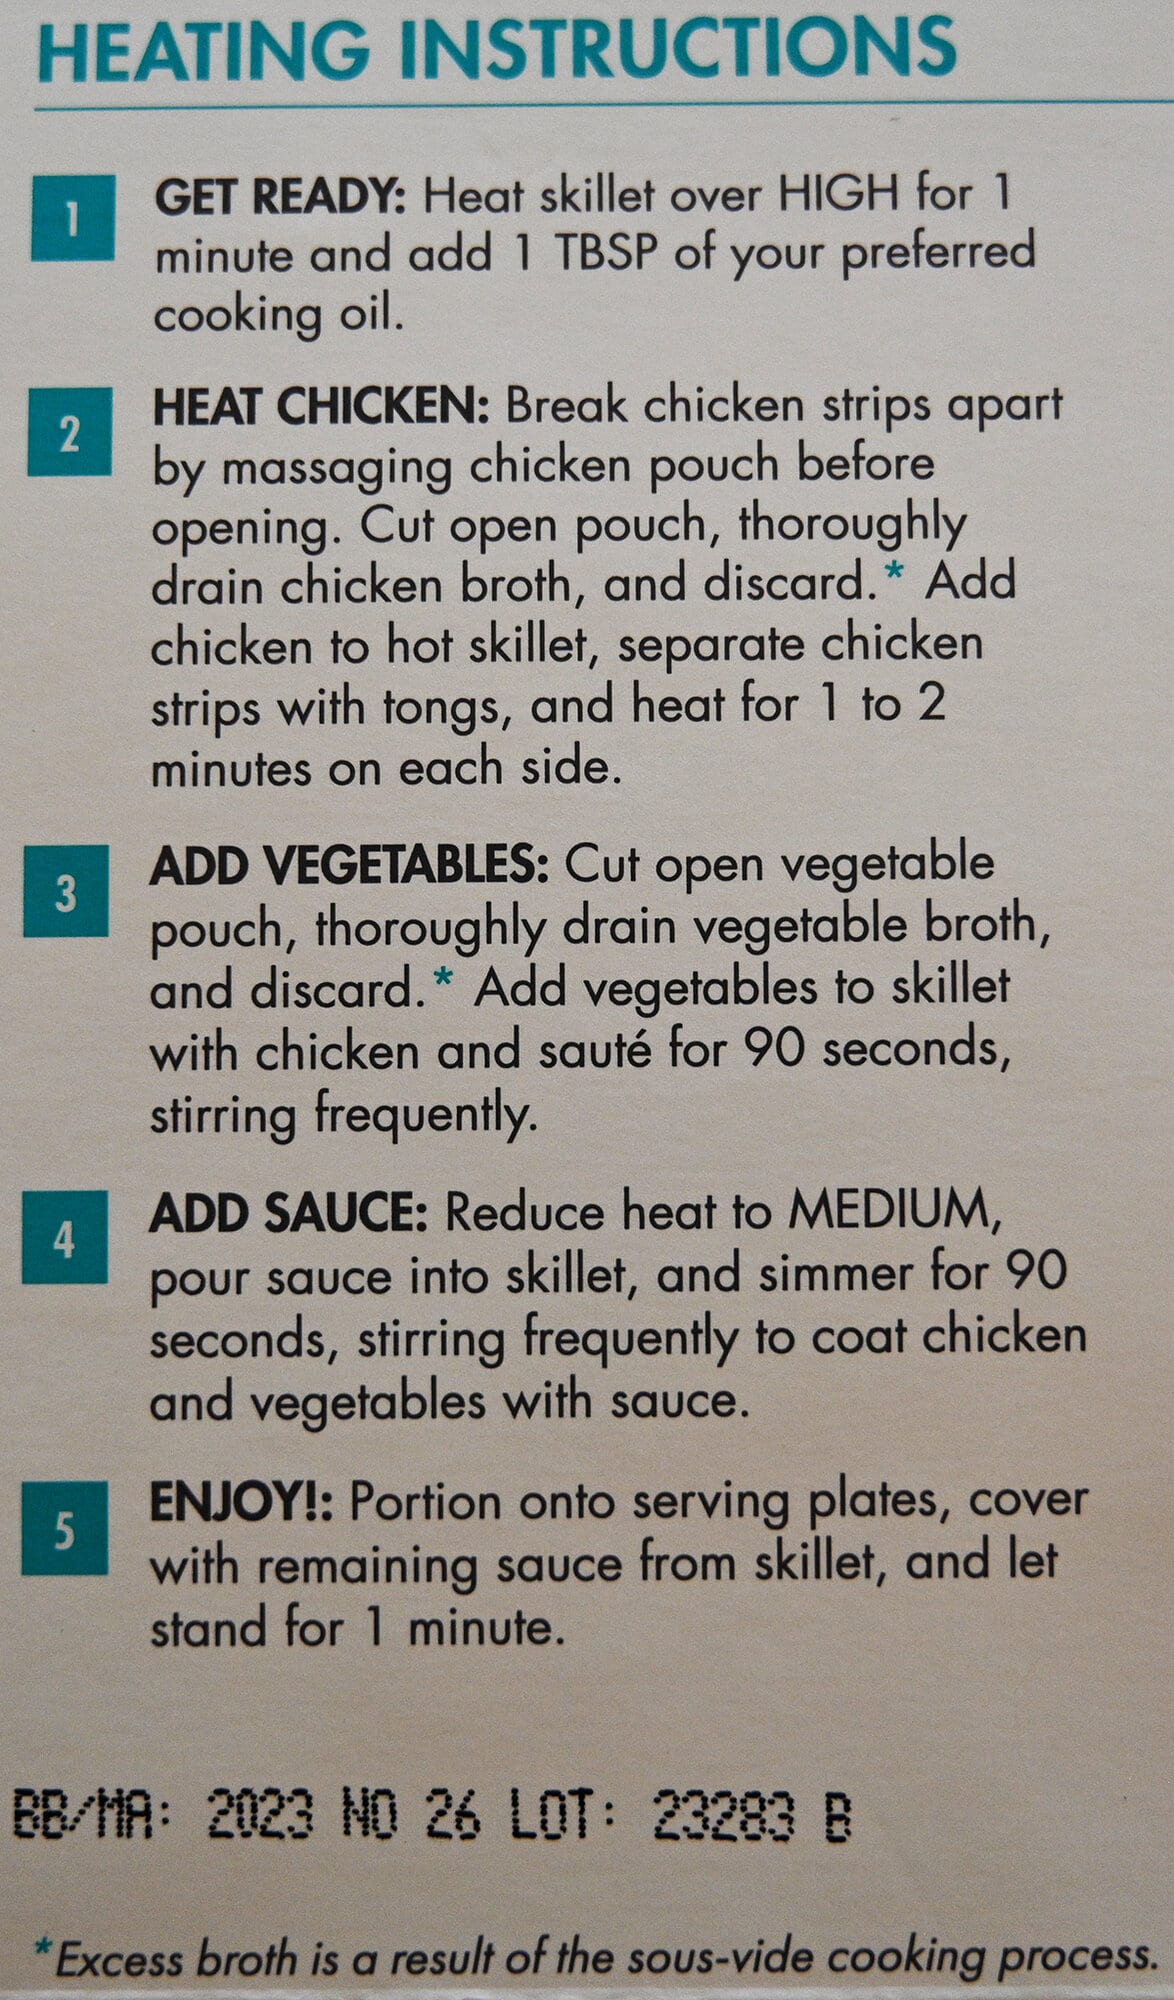 Image of the heating instructions for the stir-fry from the package.